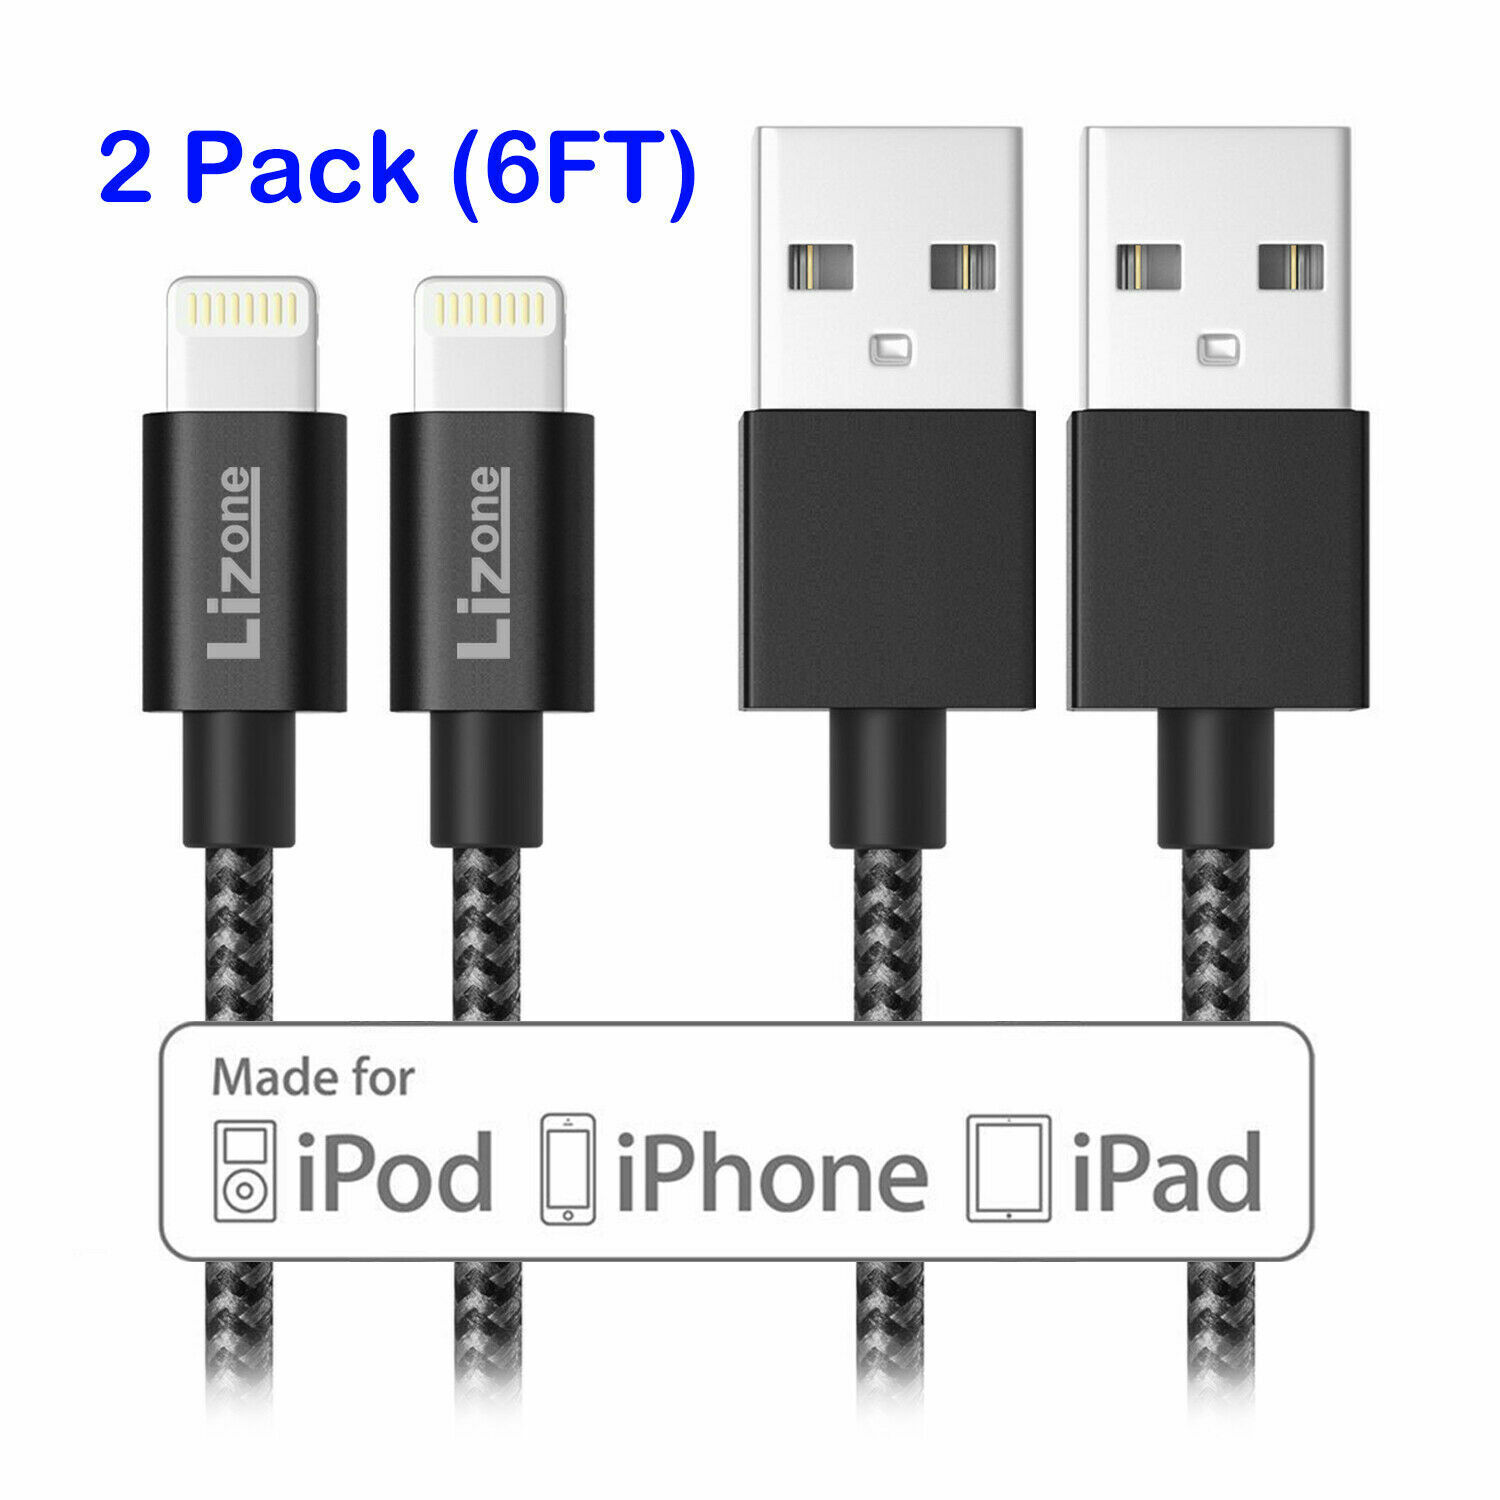 2 Pack Lightning Cable 6Ft MFi Certified Black Flawless Apple iPhone iPad iPod